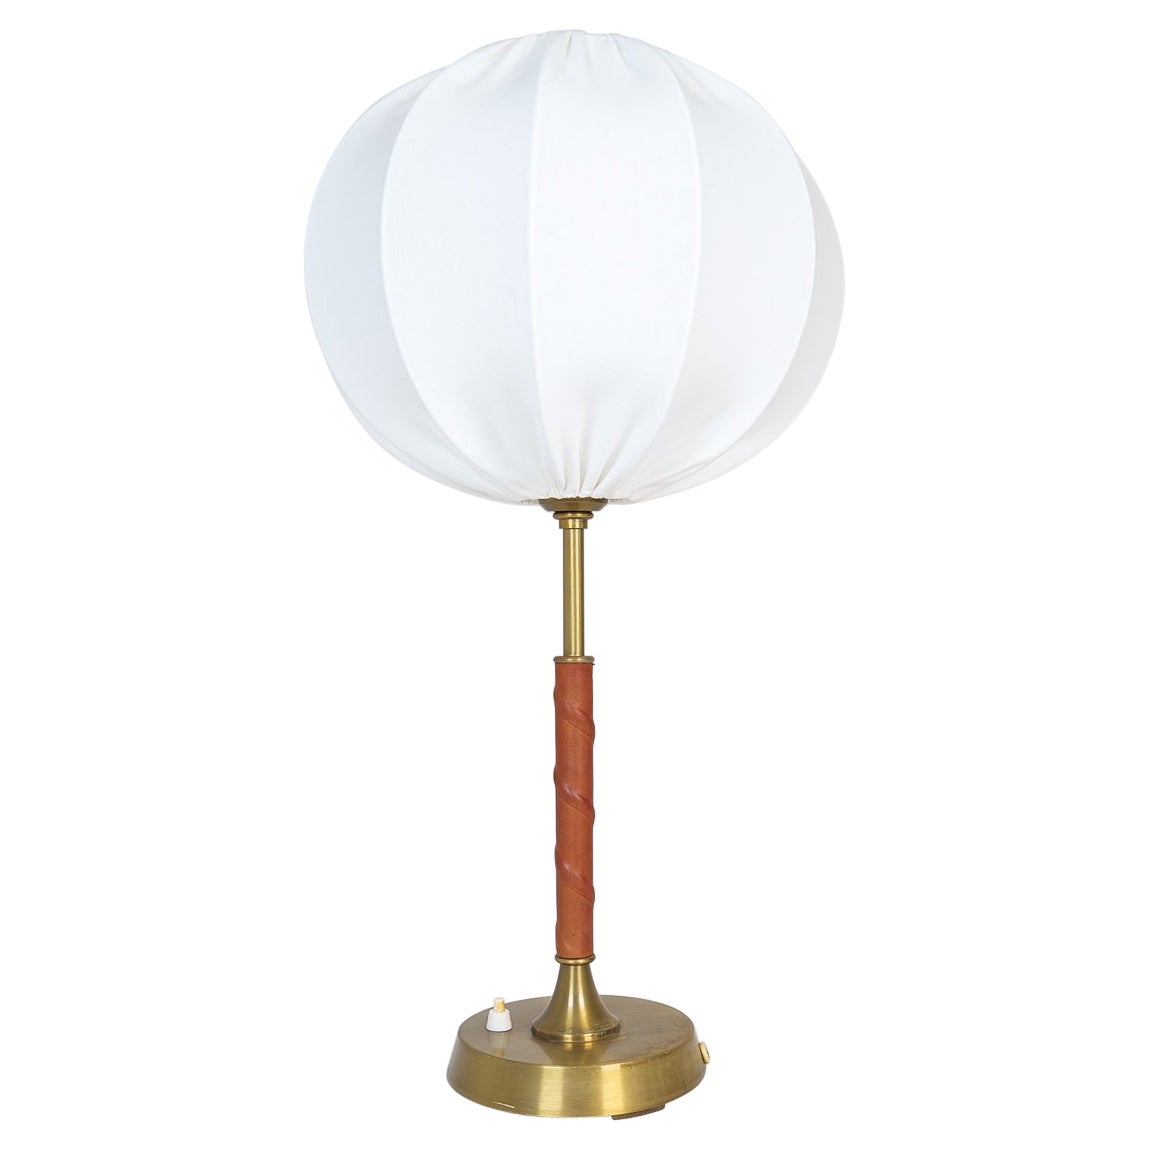 Table Lamp Mid-Century Modern Architectural Wood and Brass, 1950s at ...